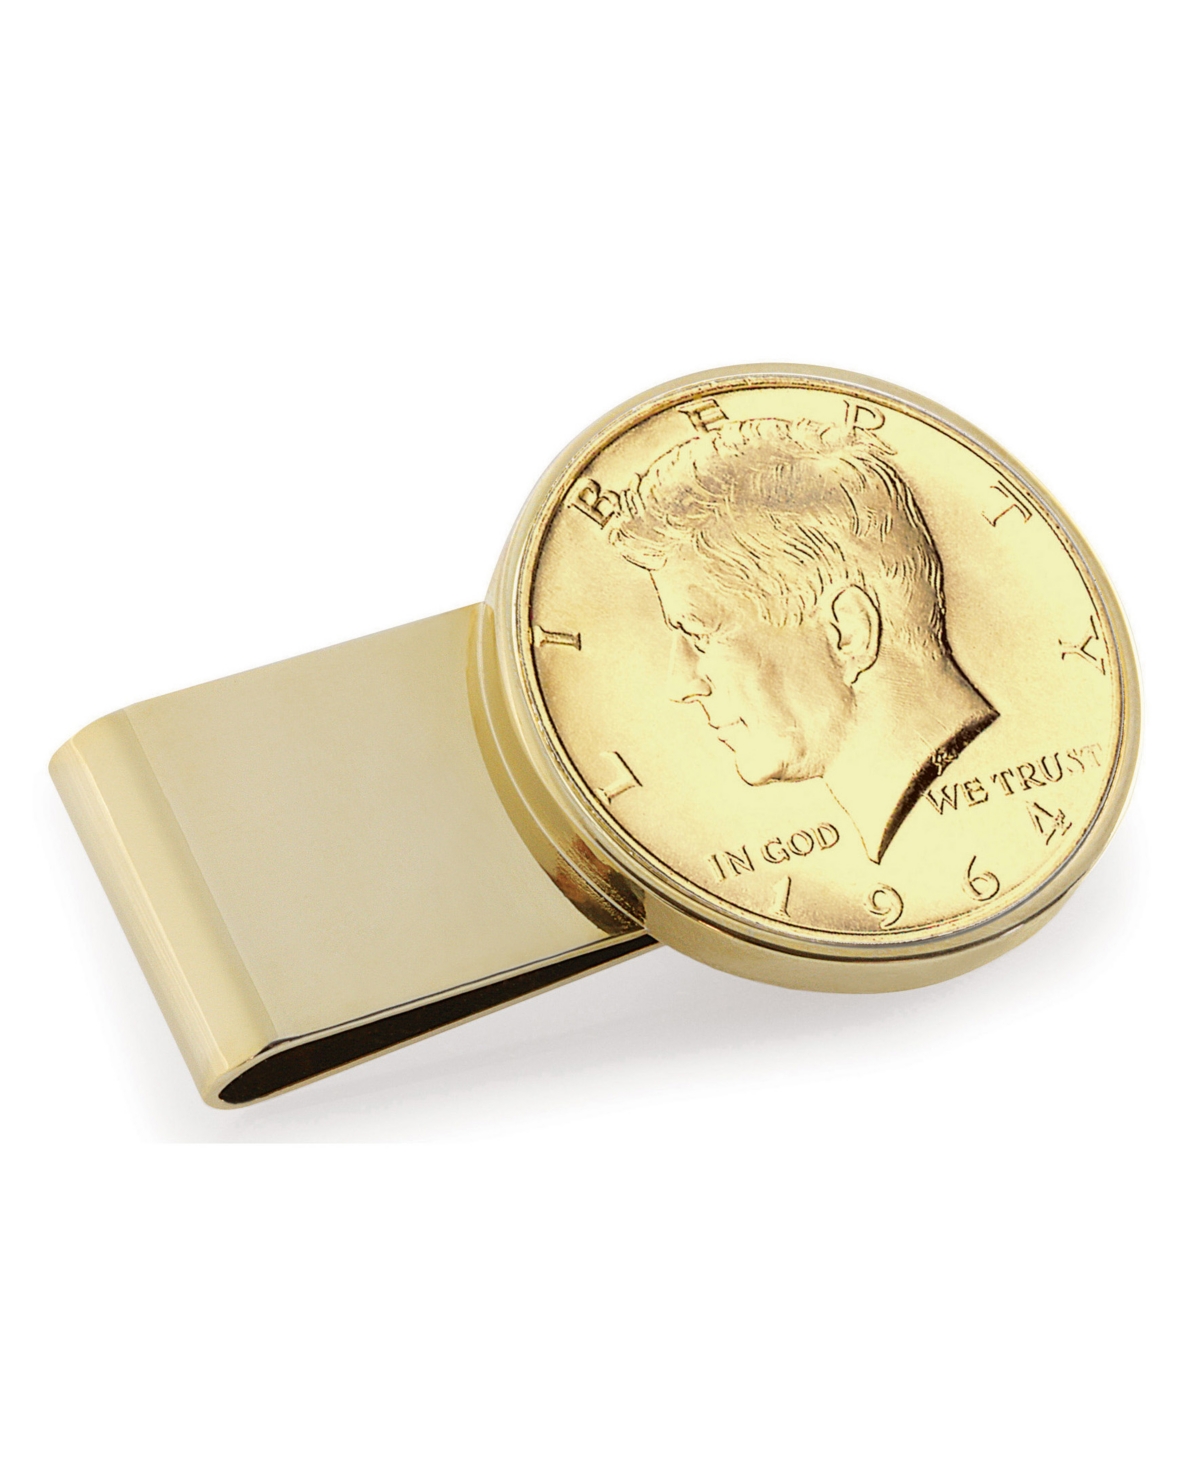 American Coin Treasures Men's American Coin Treasures Gold-Layered Jfk 1964 First Year of Issue Half Dollar Stainless Steel Coin Money Clip